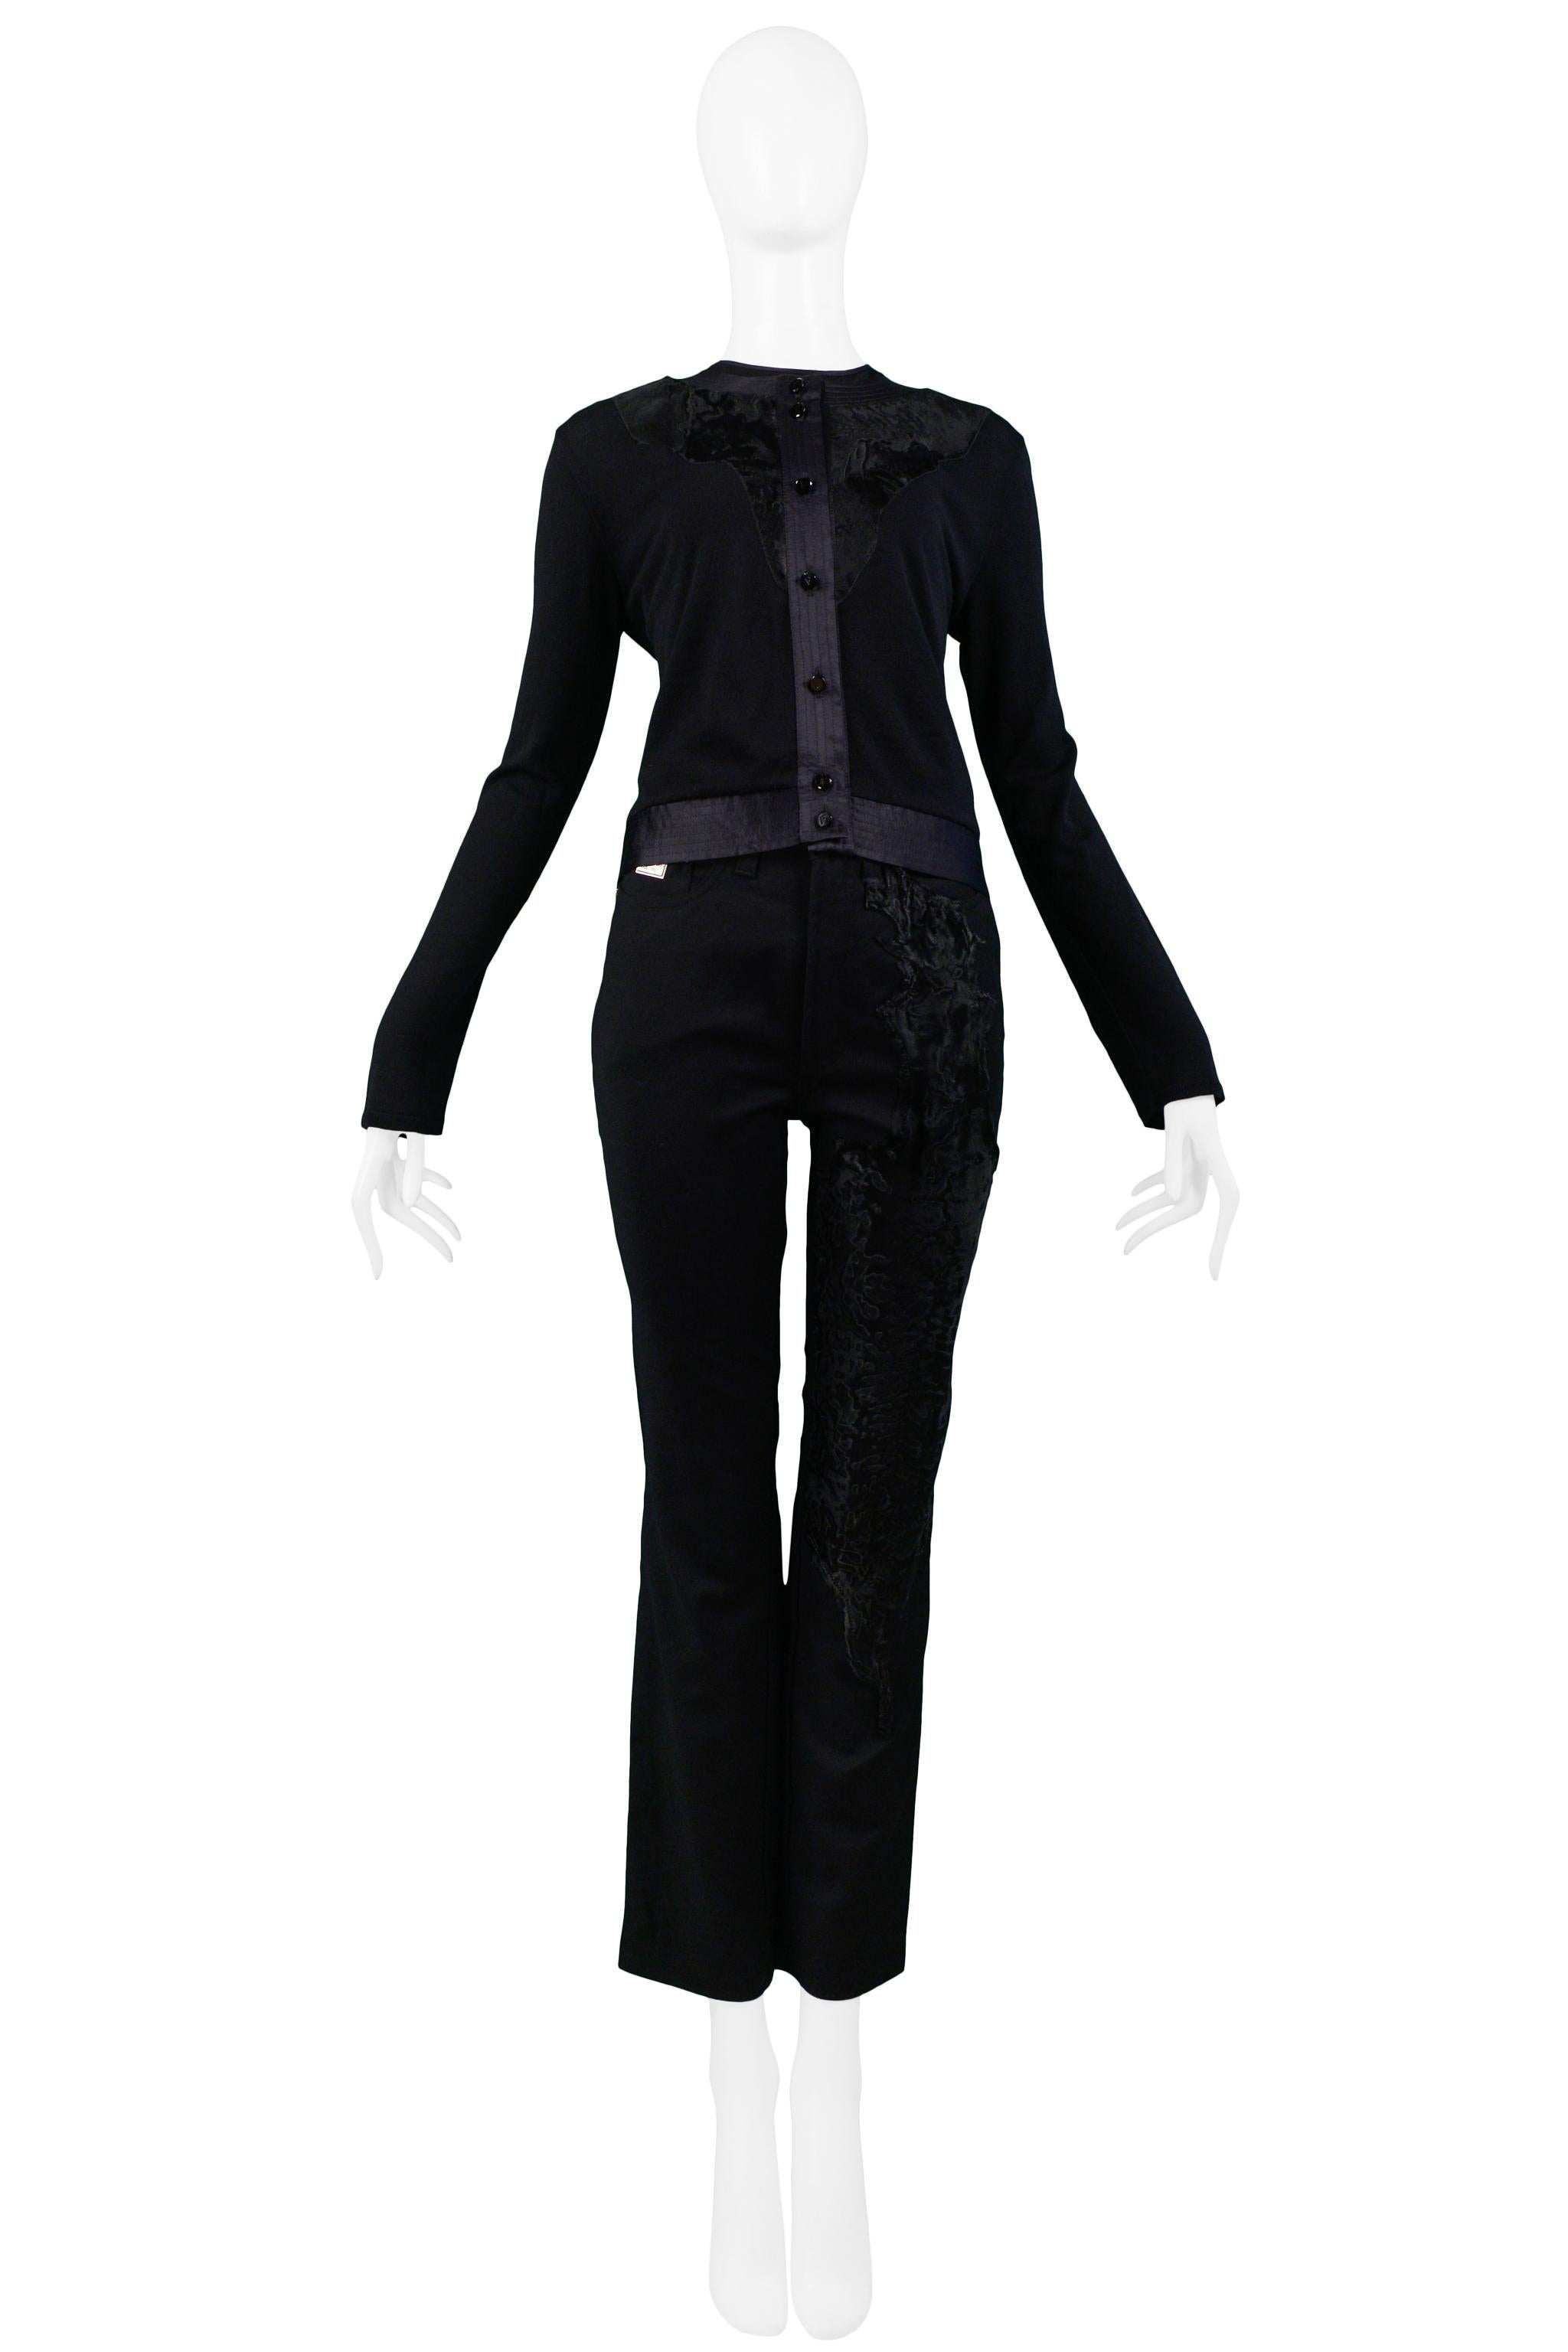 Resurrection Vintage is excited to offer a vintage Gianfranco Ferre black twin-set featuring a black knit cardigan with satin trim, and a matching black knit sleeveless shell top with satin trim. The pants feature a classic five-pocket jeans body